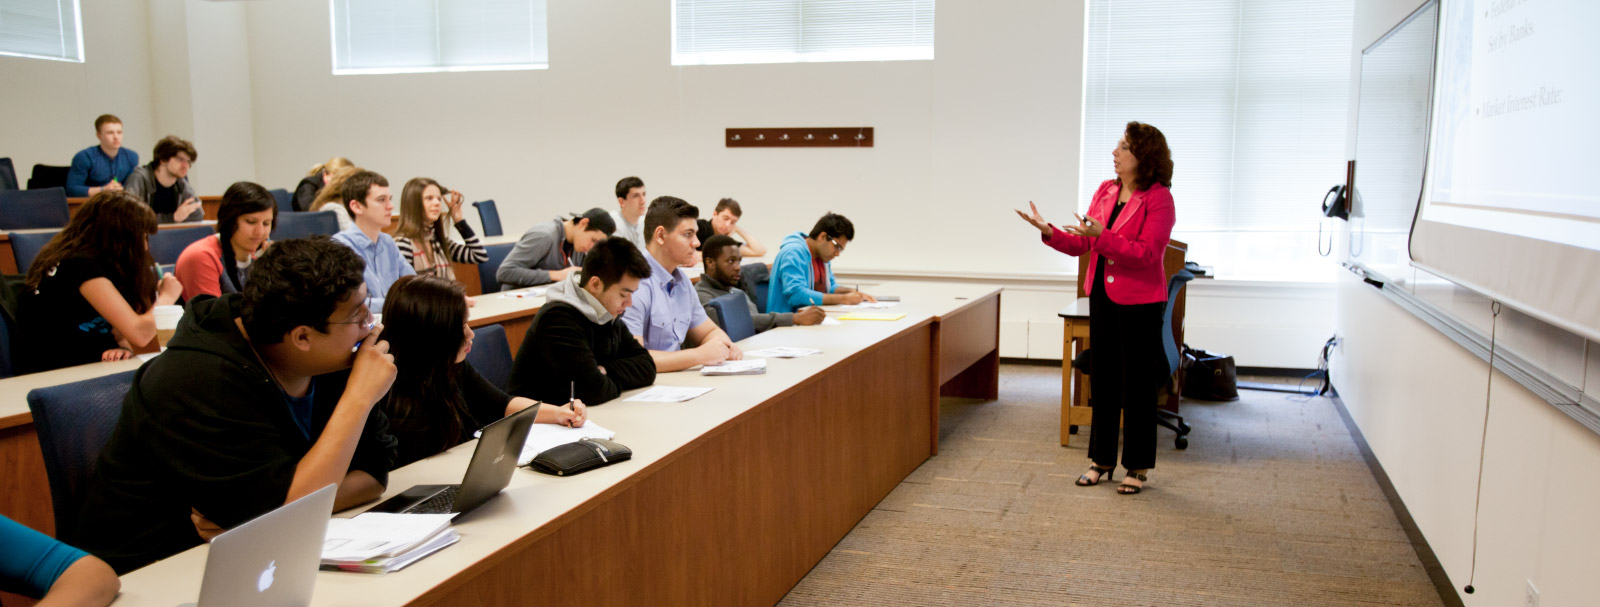 Caucasian professor lecturing in front of rows of students